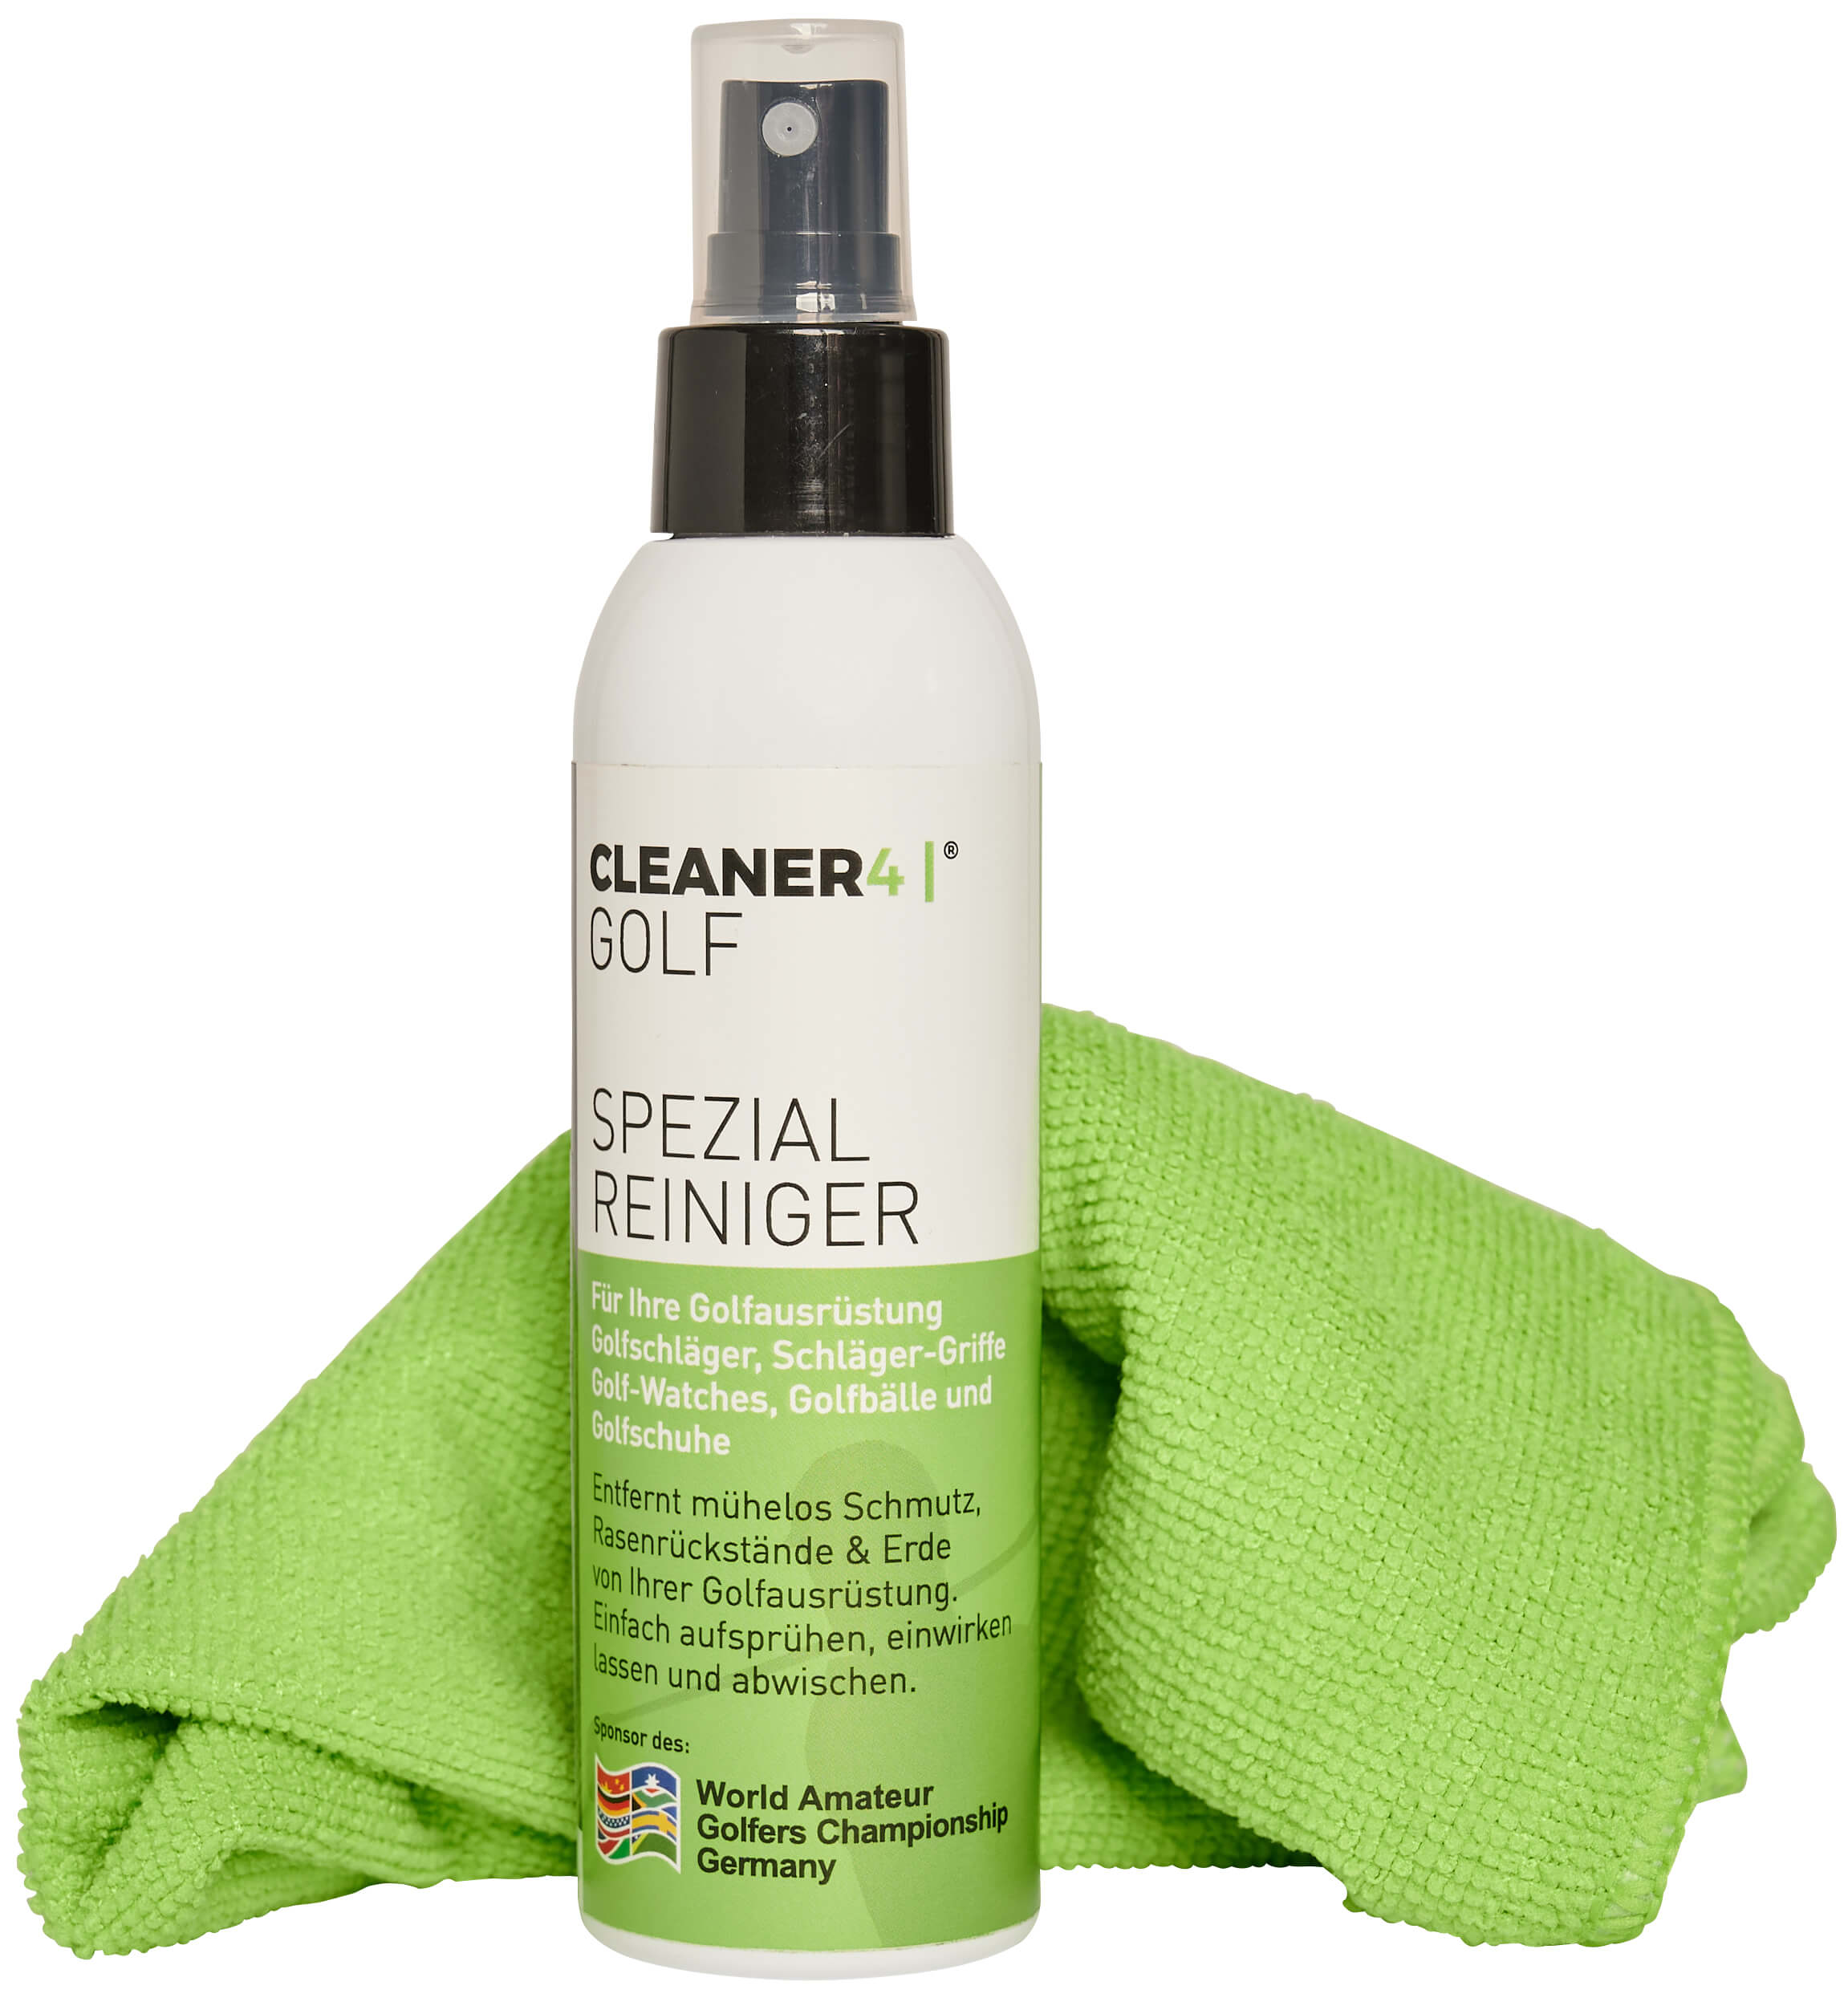 CLEANER4 Aktions Set, 150ml Cleaner4 + Mikrofasertuch